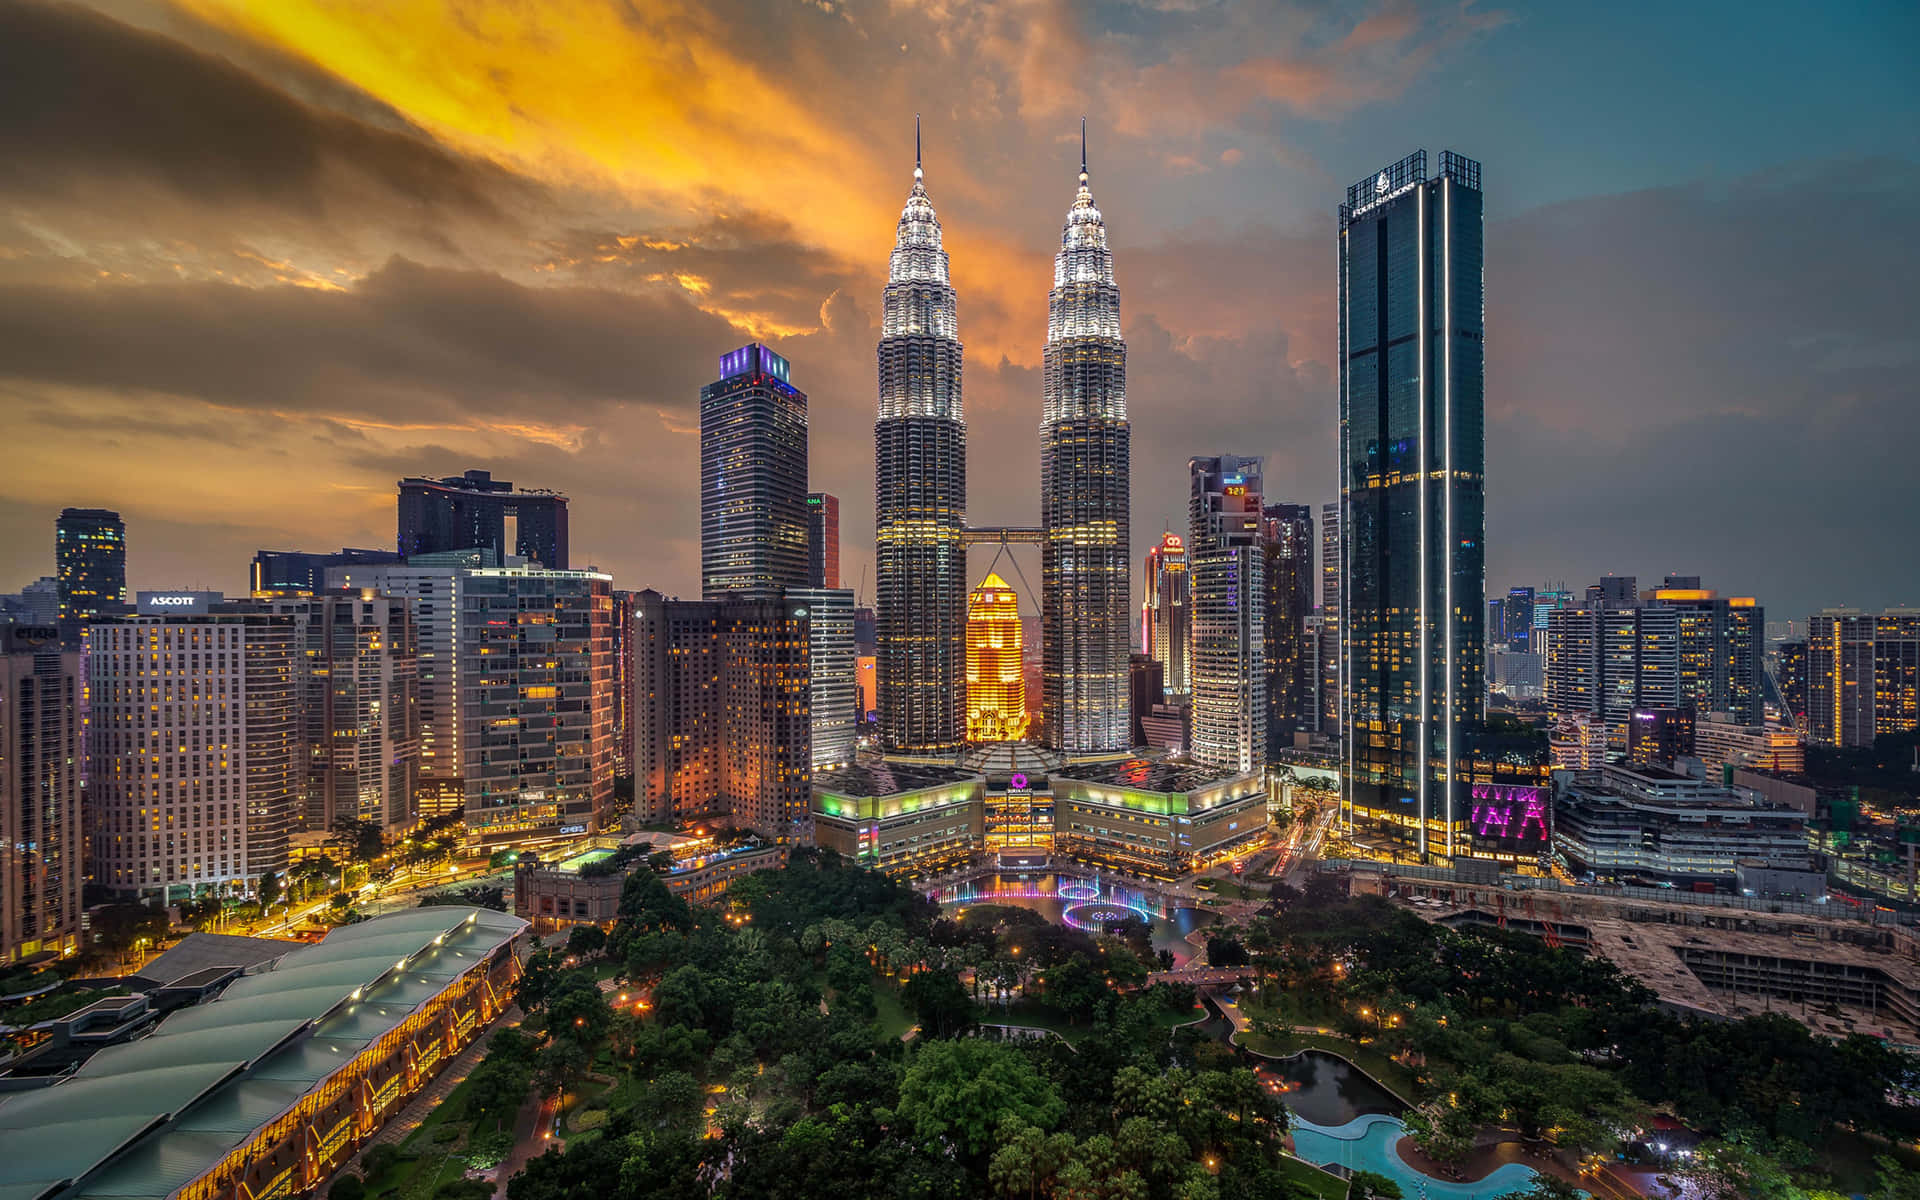 A Cityscape With The Petronas Towers In The Background